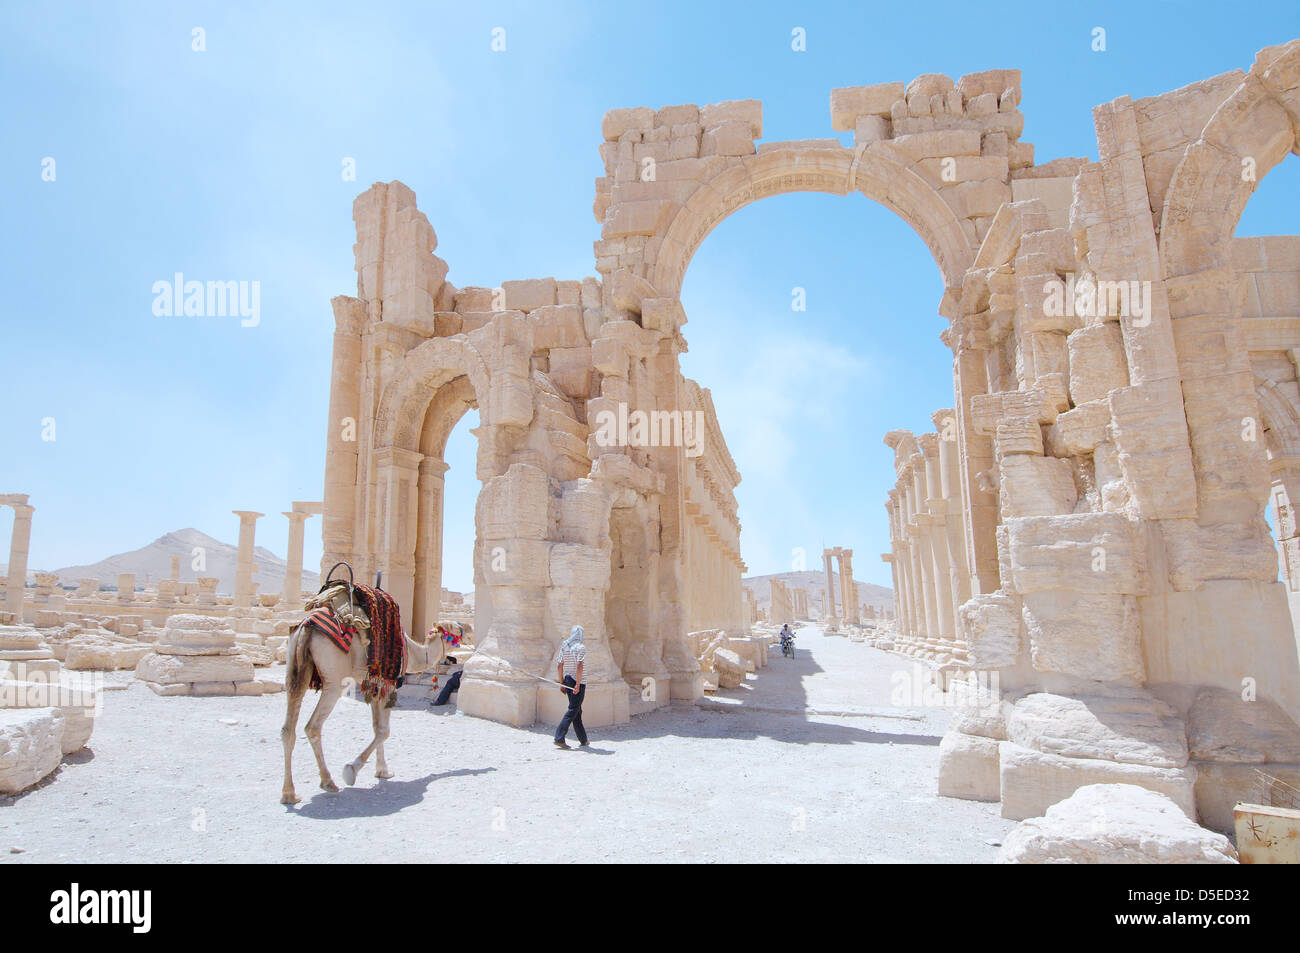 Monumental Arch, Arch of Triumph, or  Arch of Septimius Severus in Palmyra, Syria Stock Photo